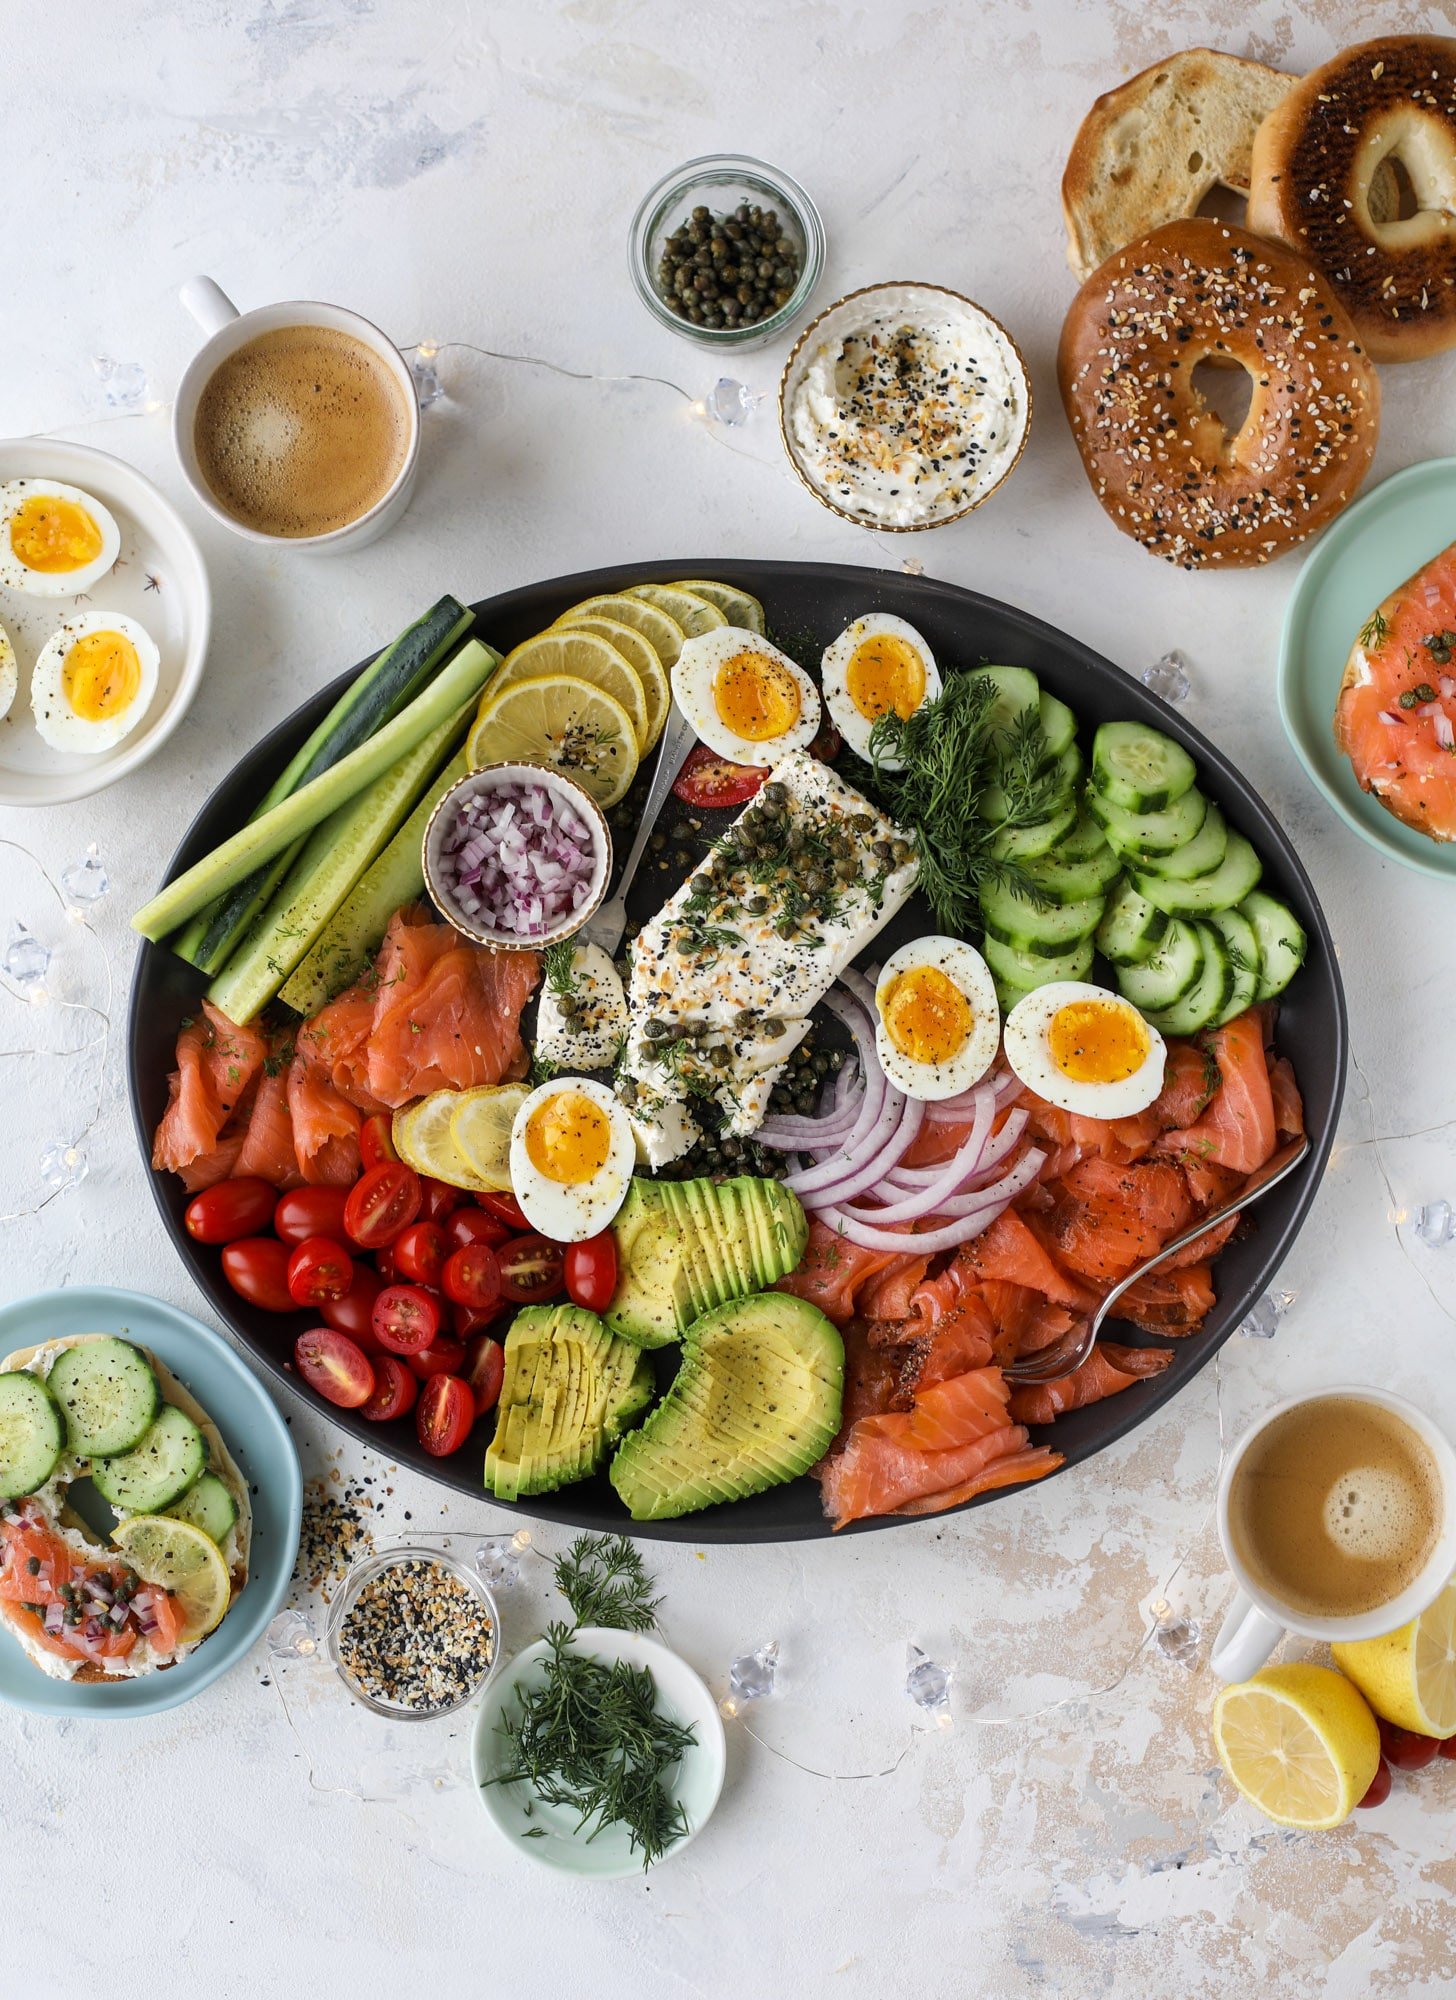 This is my favorite way to make an incredible smoked salmon platter! Fresh smoked salmon with bagels, soft boiled eggs, cream cheese and capers, everything seasoning and so much more. Perfect for holiday breakfasts and brunches! I howsweeteats.com #smokedsalmon #platter